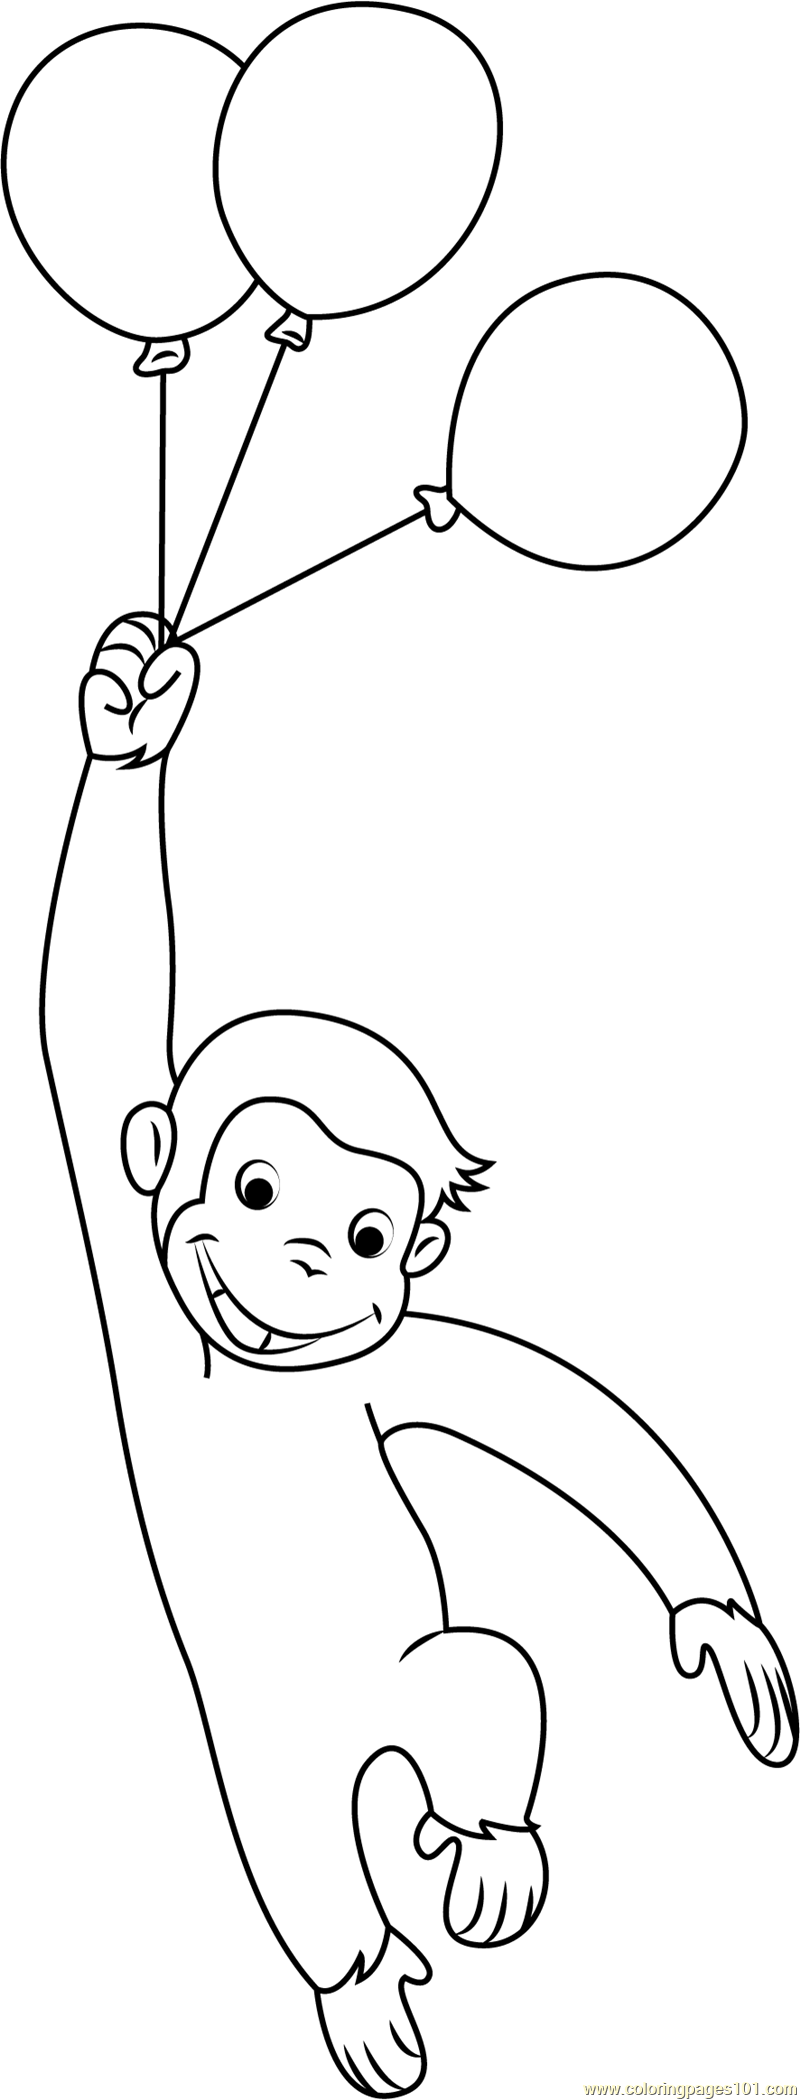 Curious George With Balloons para colorir